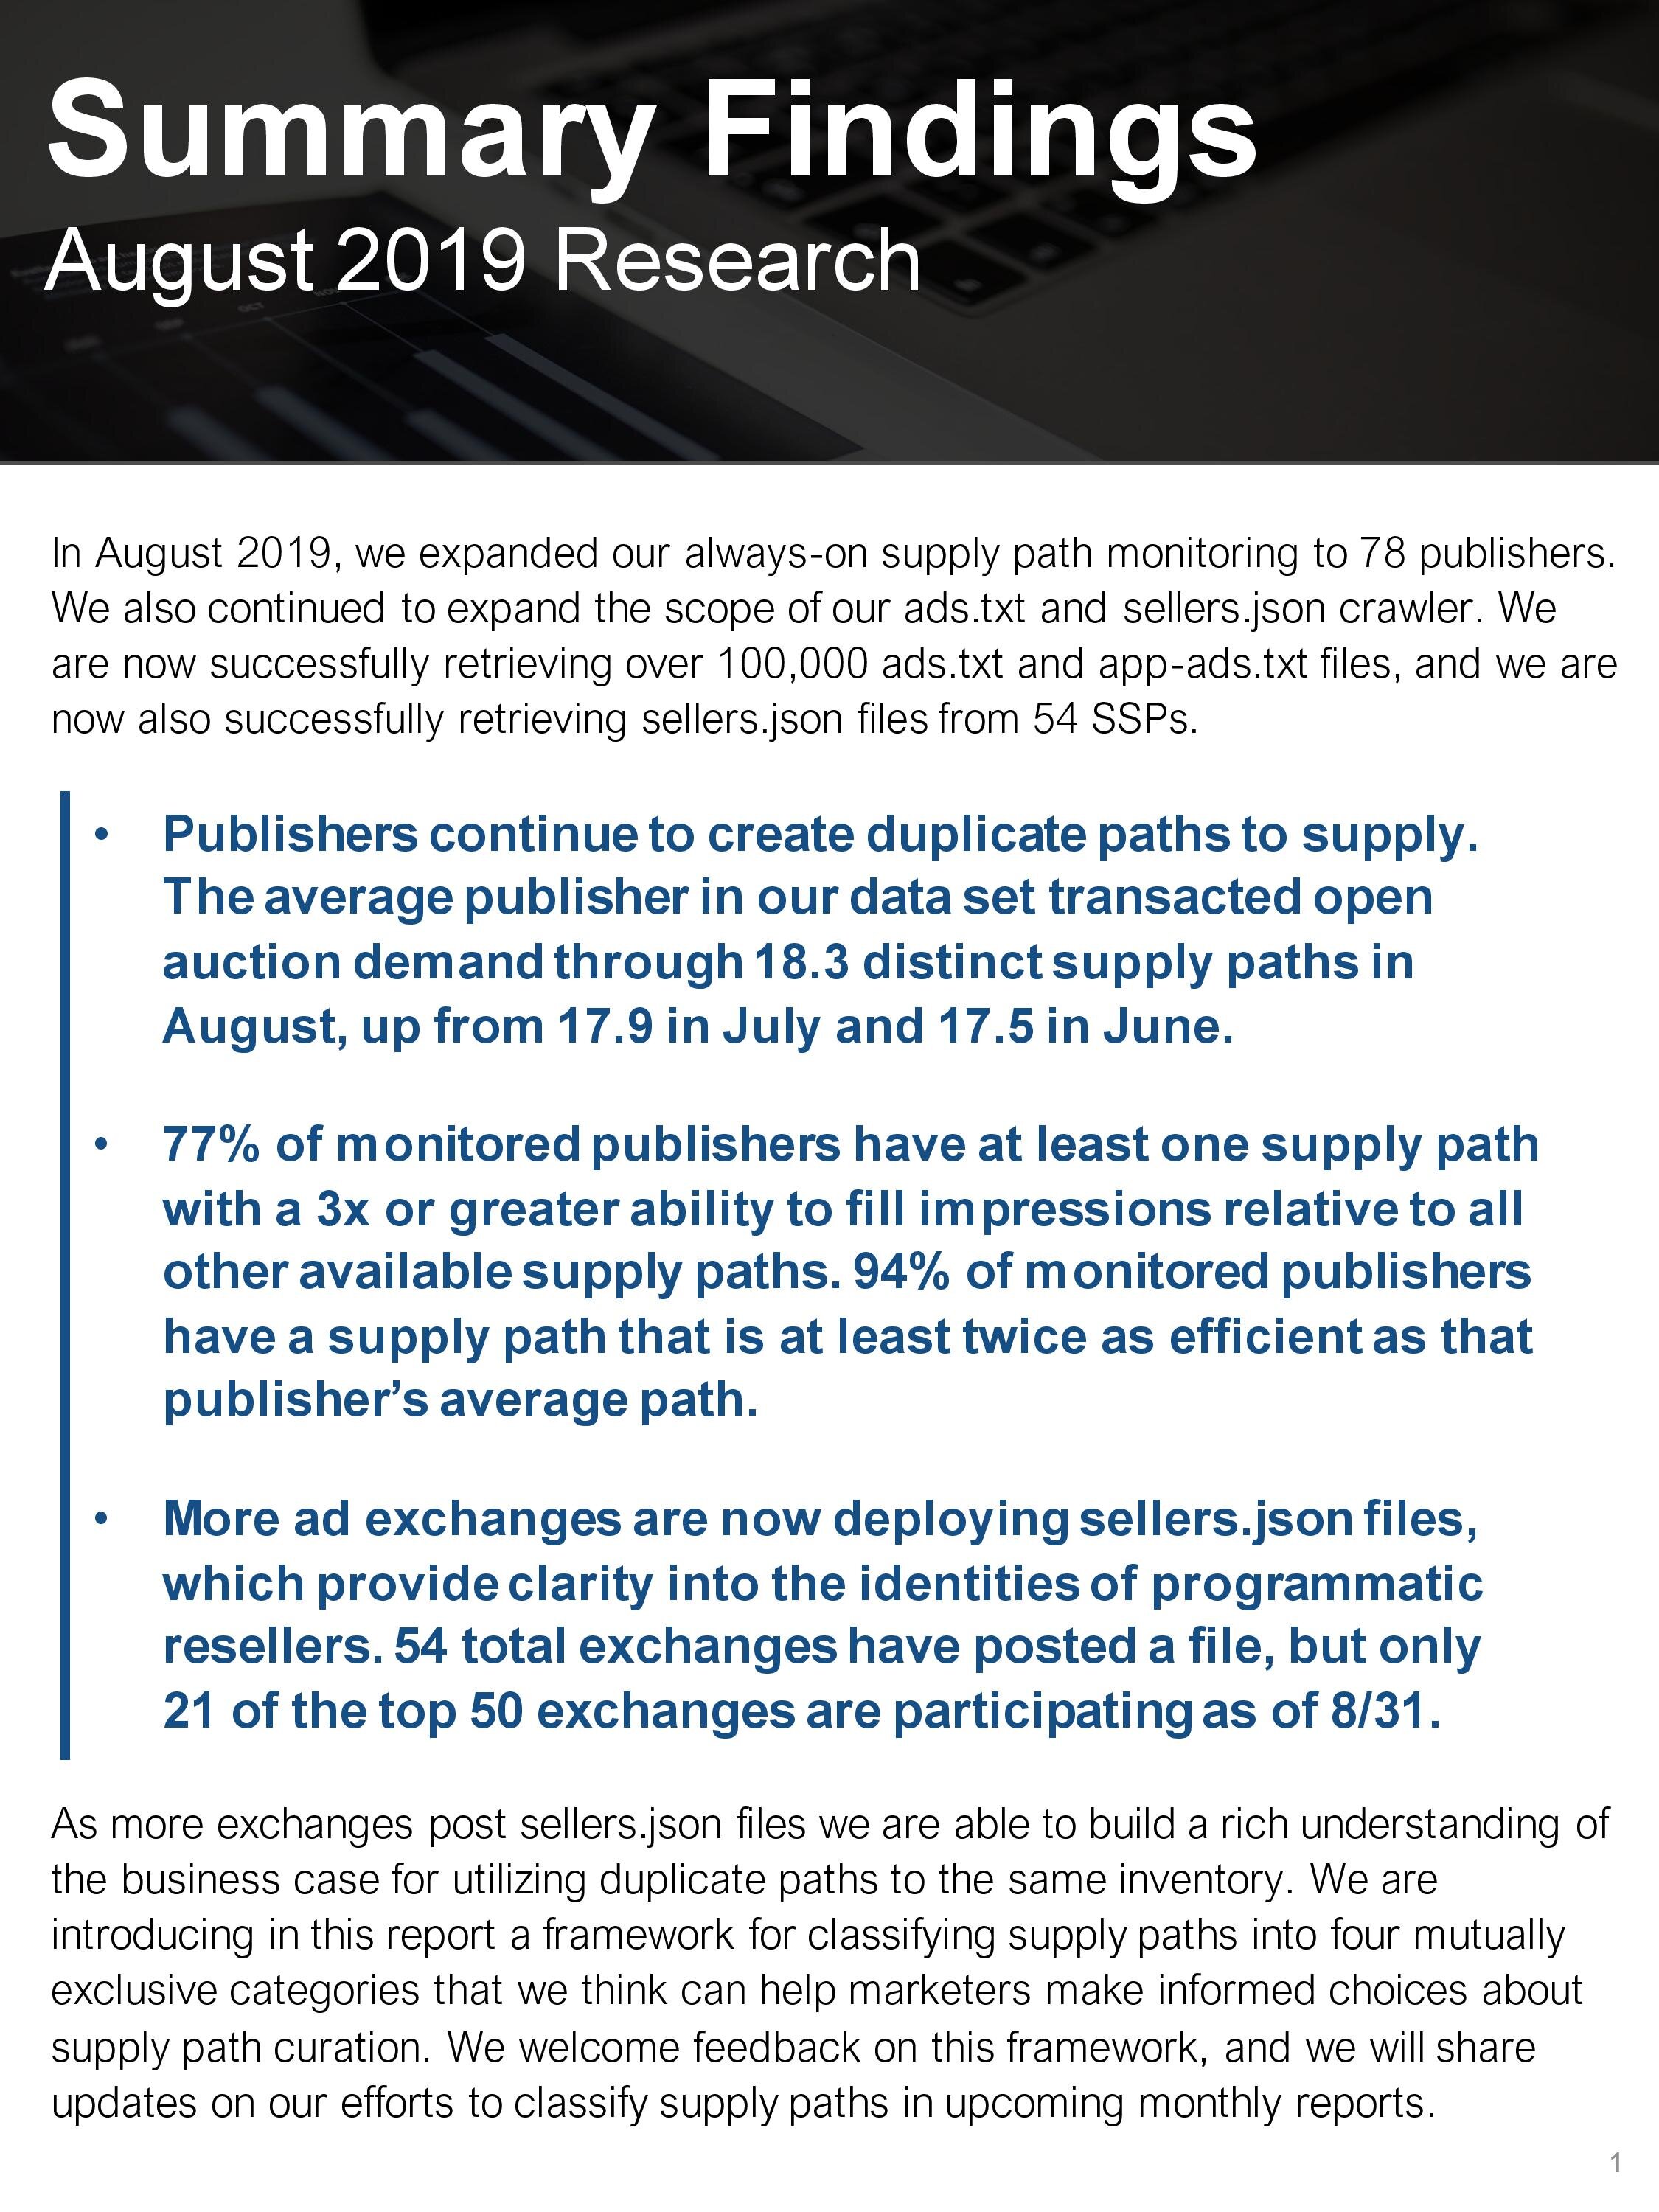 20190901 Jounce Supply Path Benchmarking Report-page-003.jpg